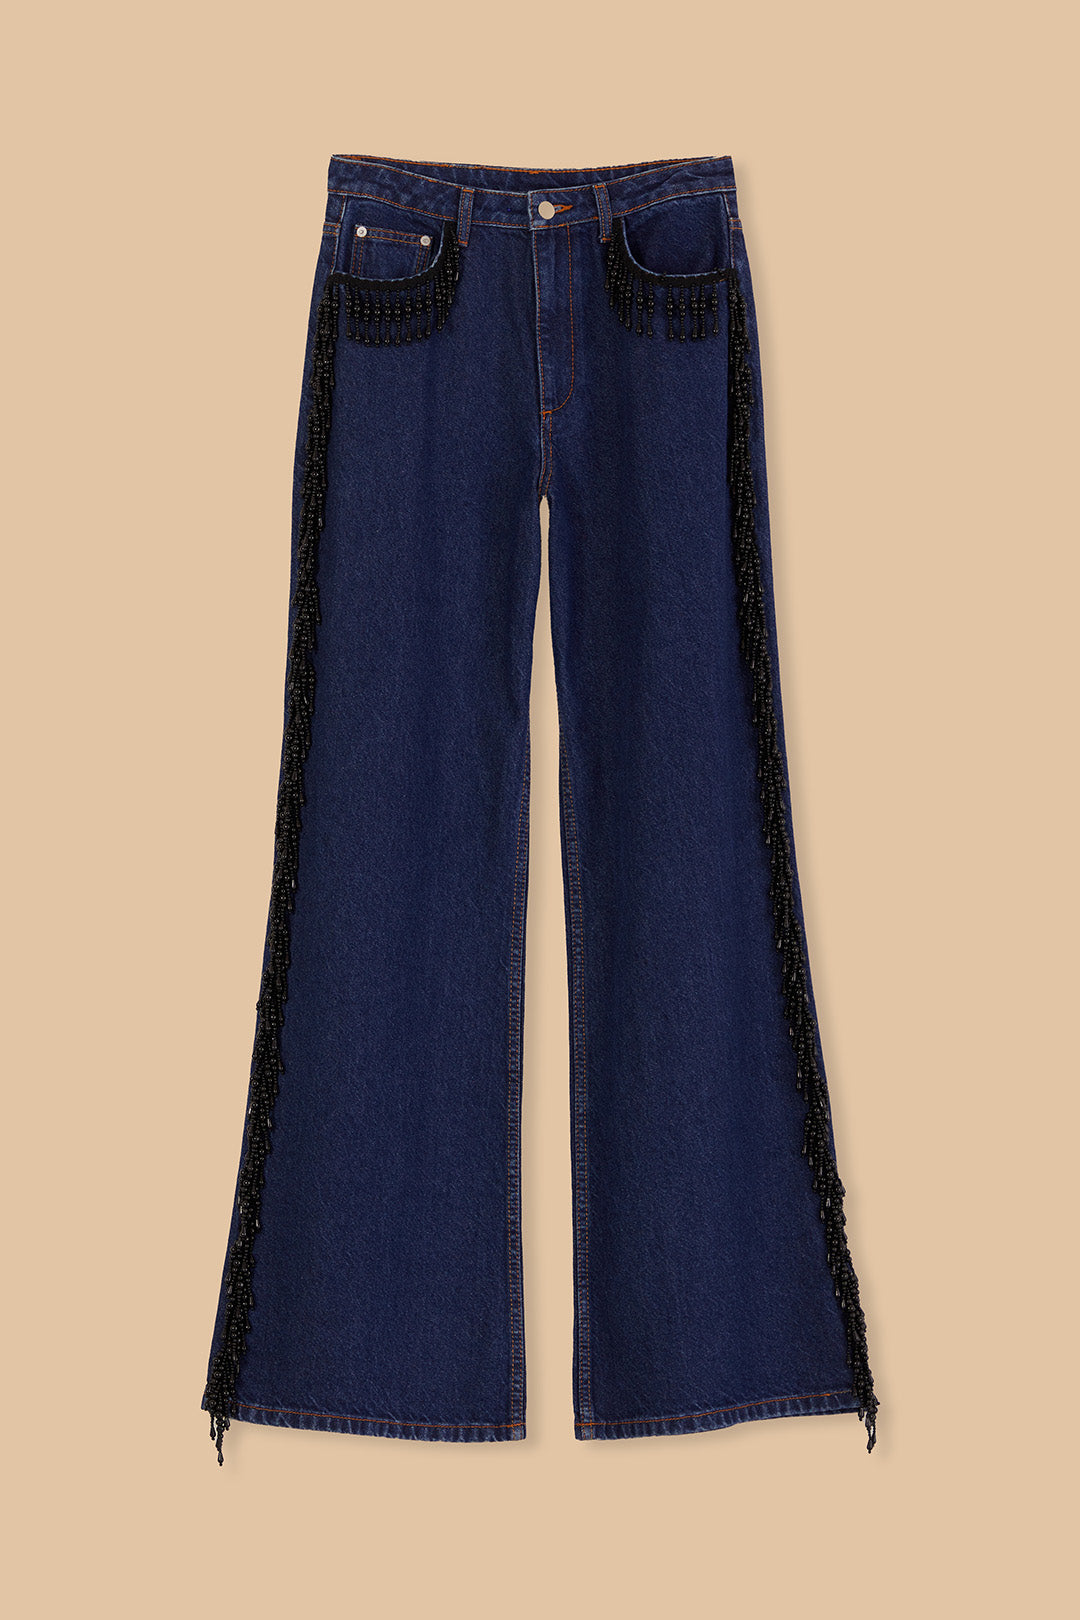 Fringes Beads Wide Pants